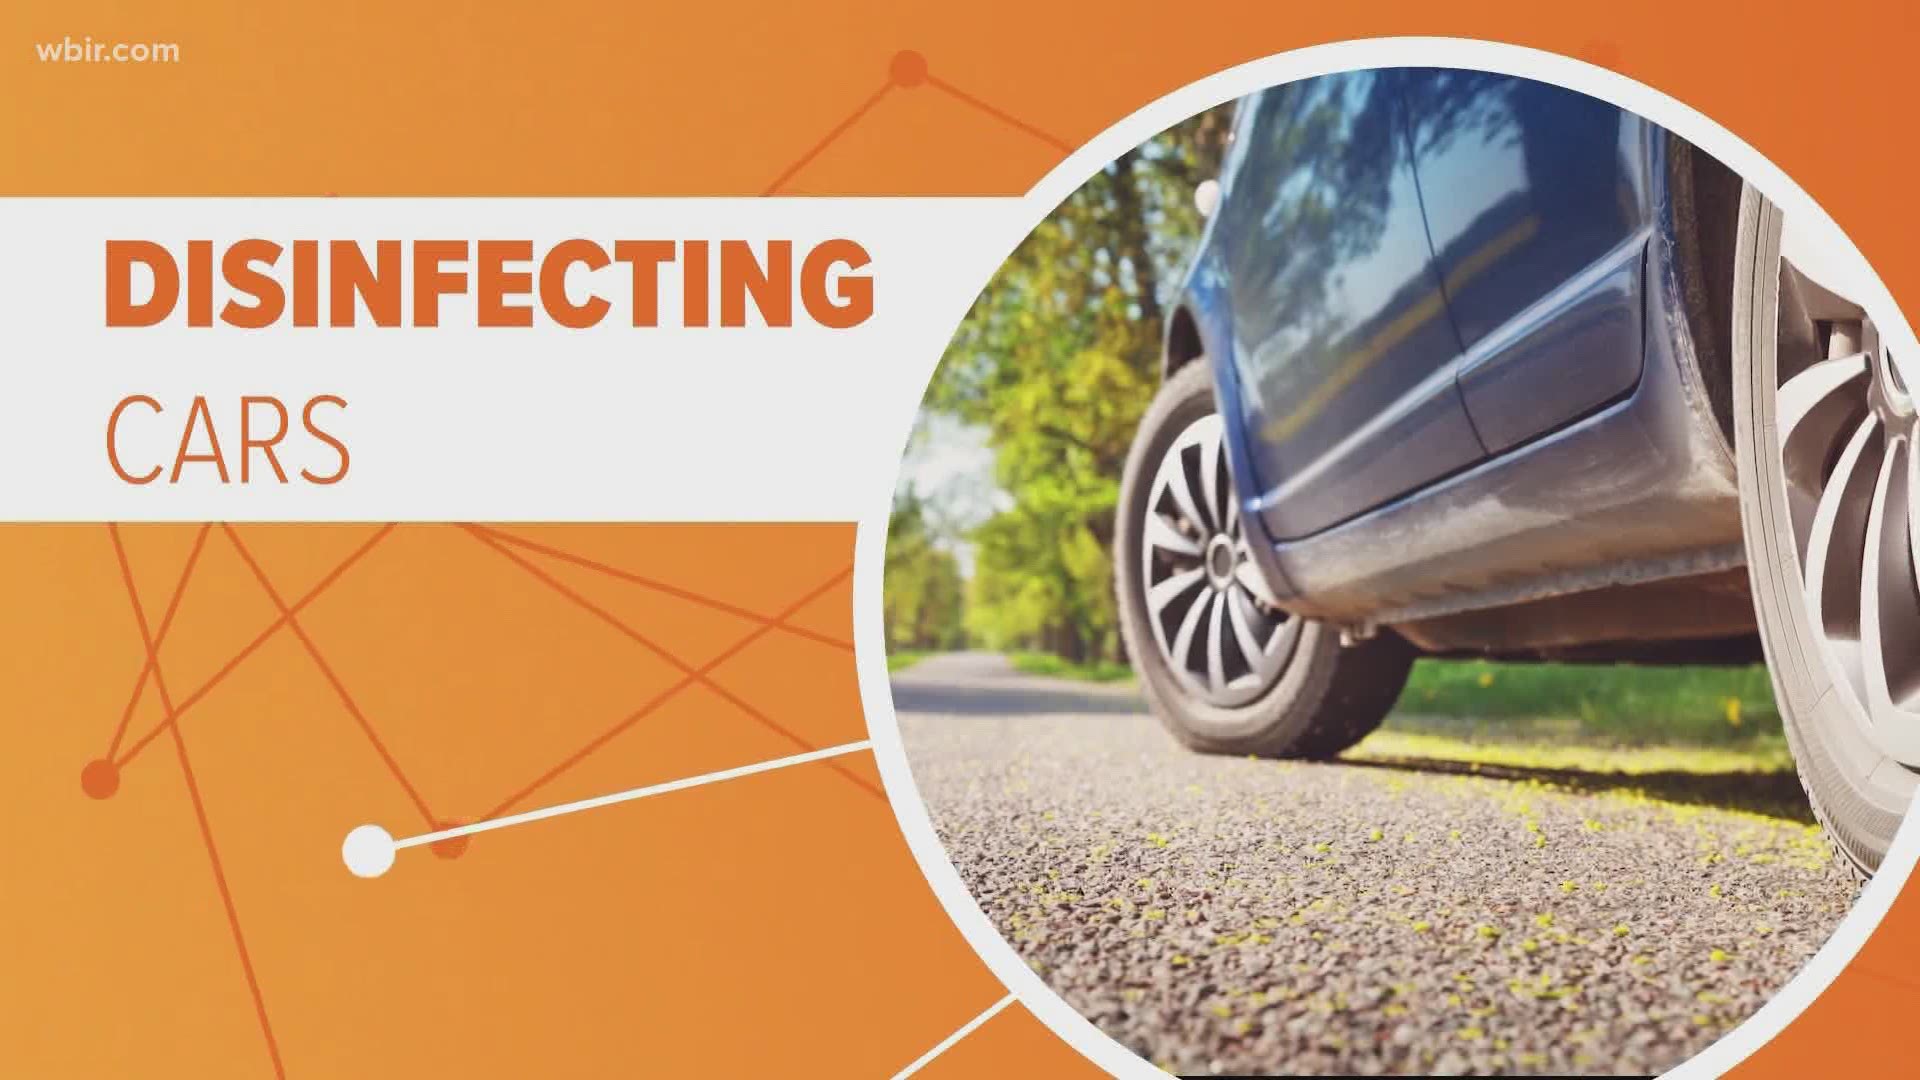 What if your car already had features to make it easier to disinfect and clean?